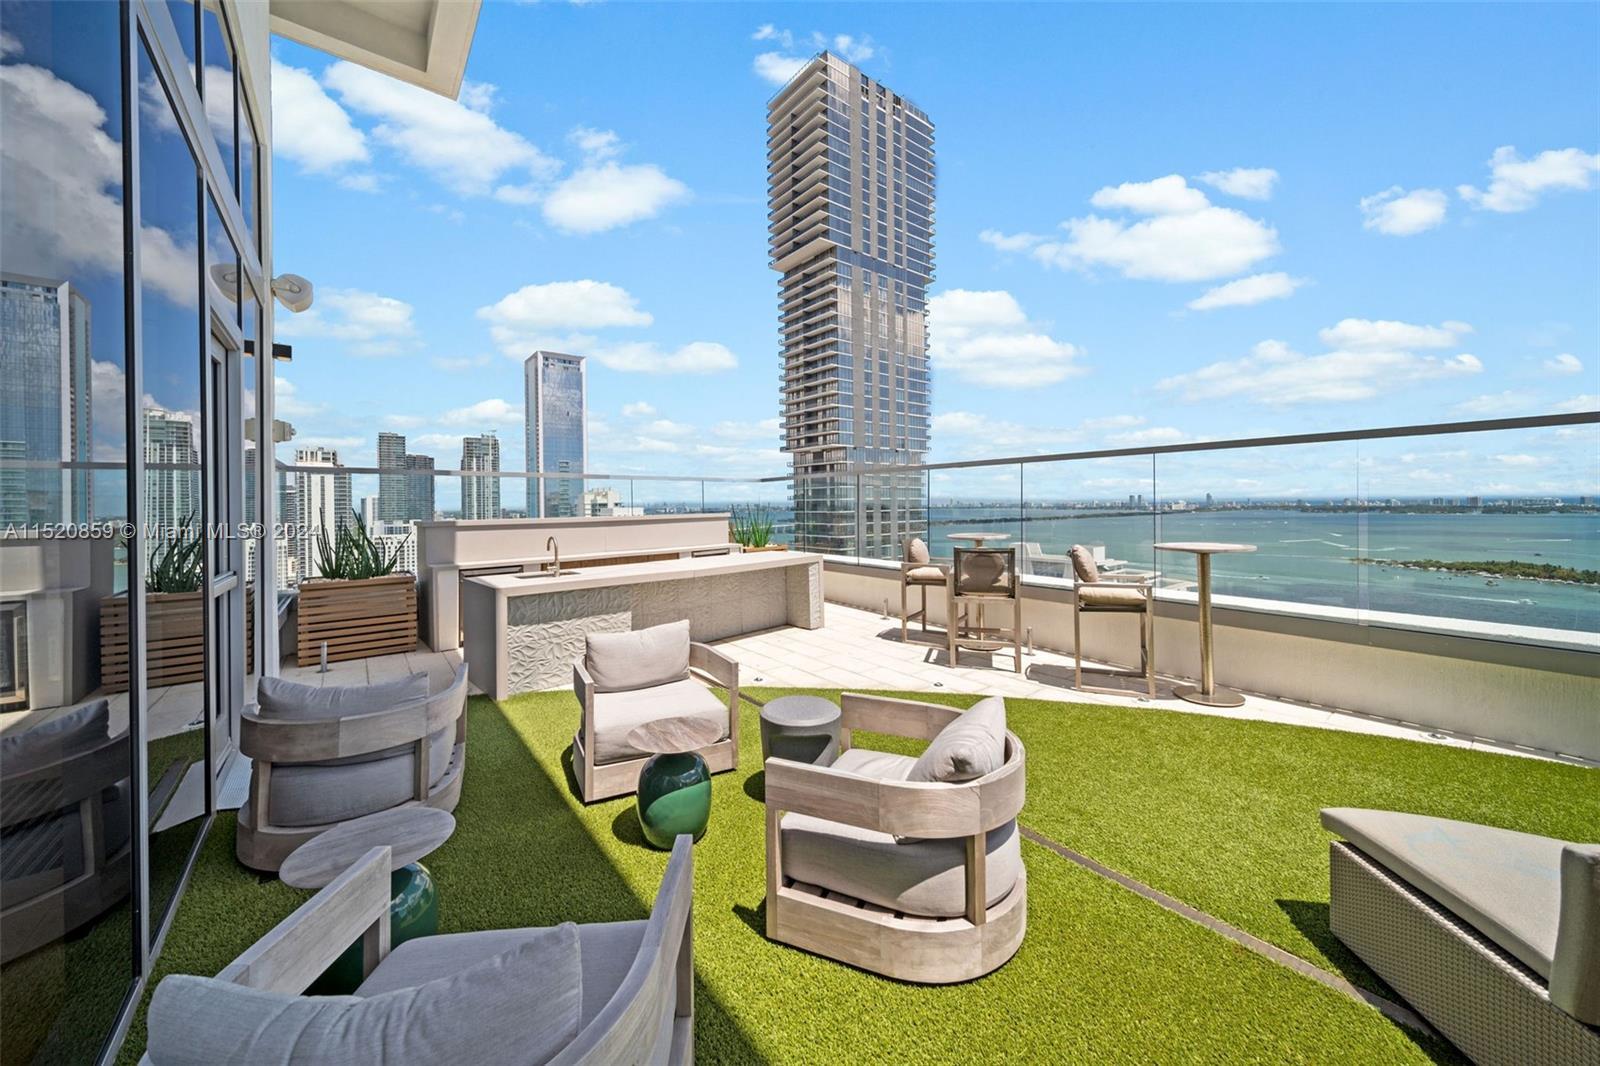 Receive two weeks free move in 05/19. AVAILABLE 01/21. The Watermarc at Biscayne Bay - Brand New Lux